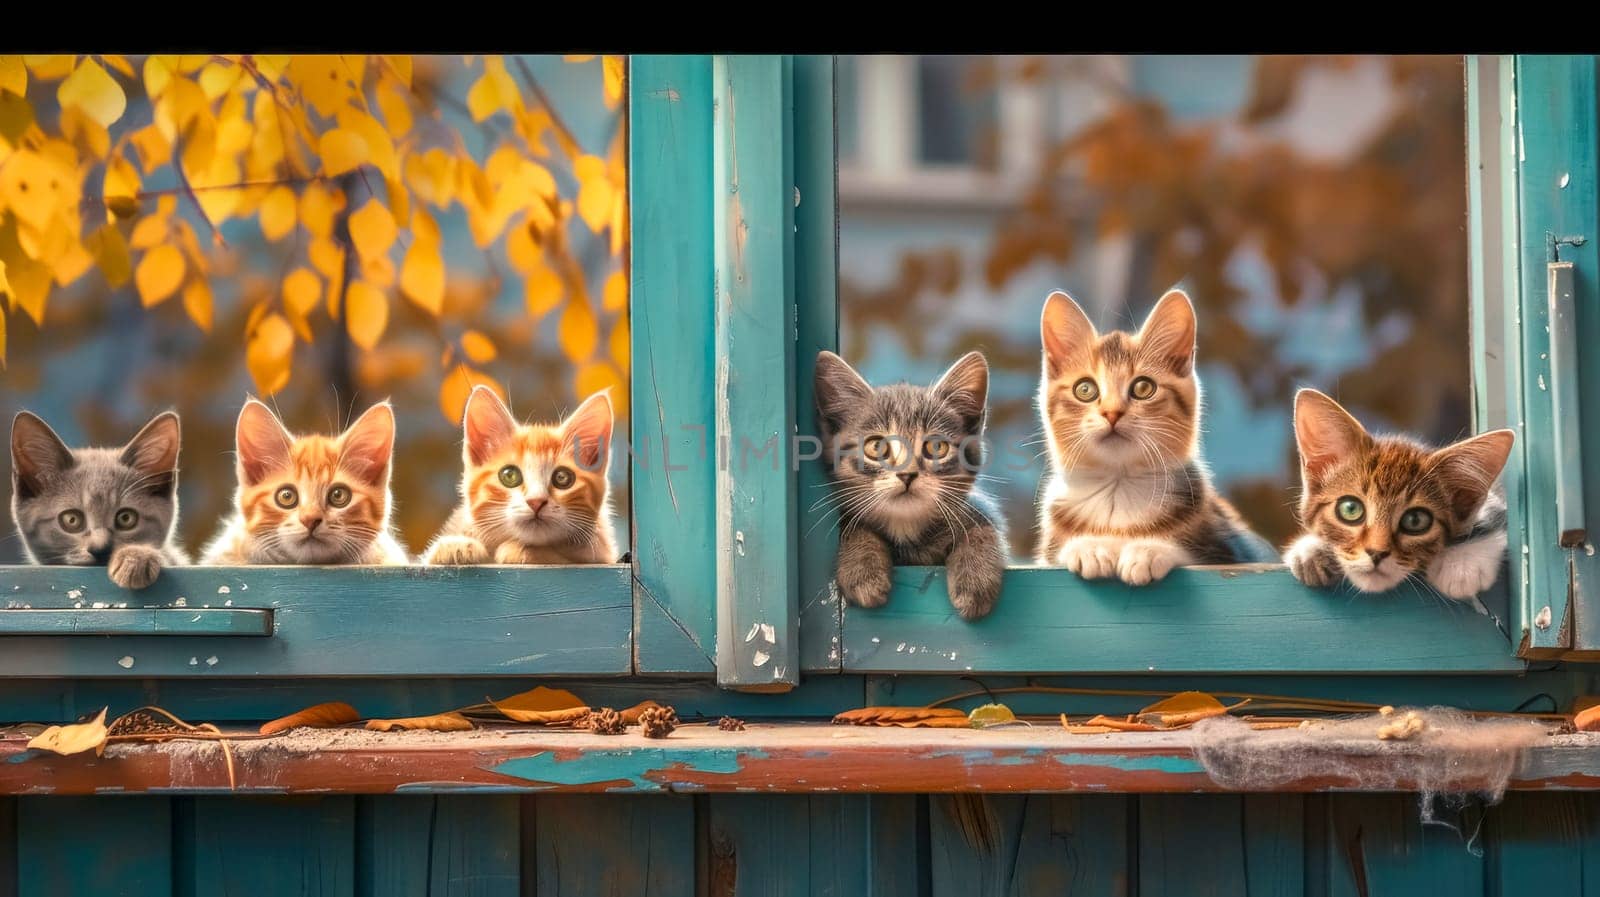 Row of adorable kittens peeking out from an open window during autumn